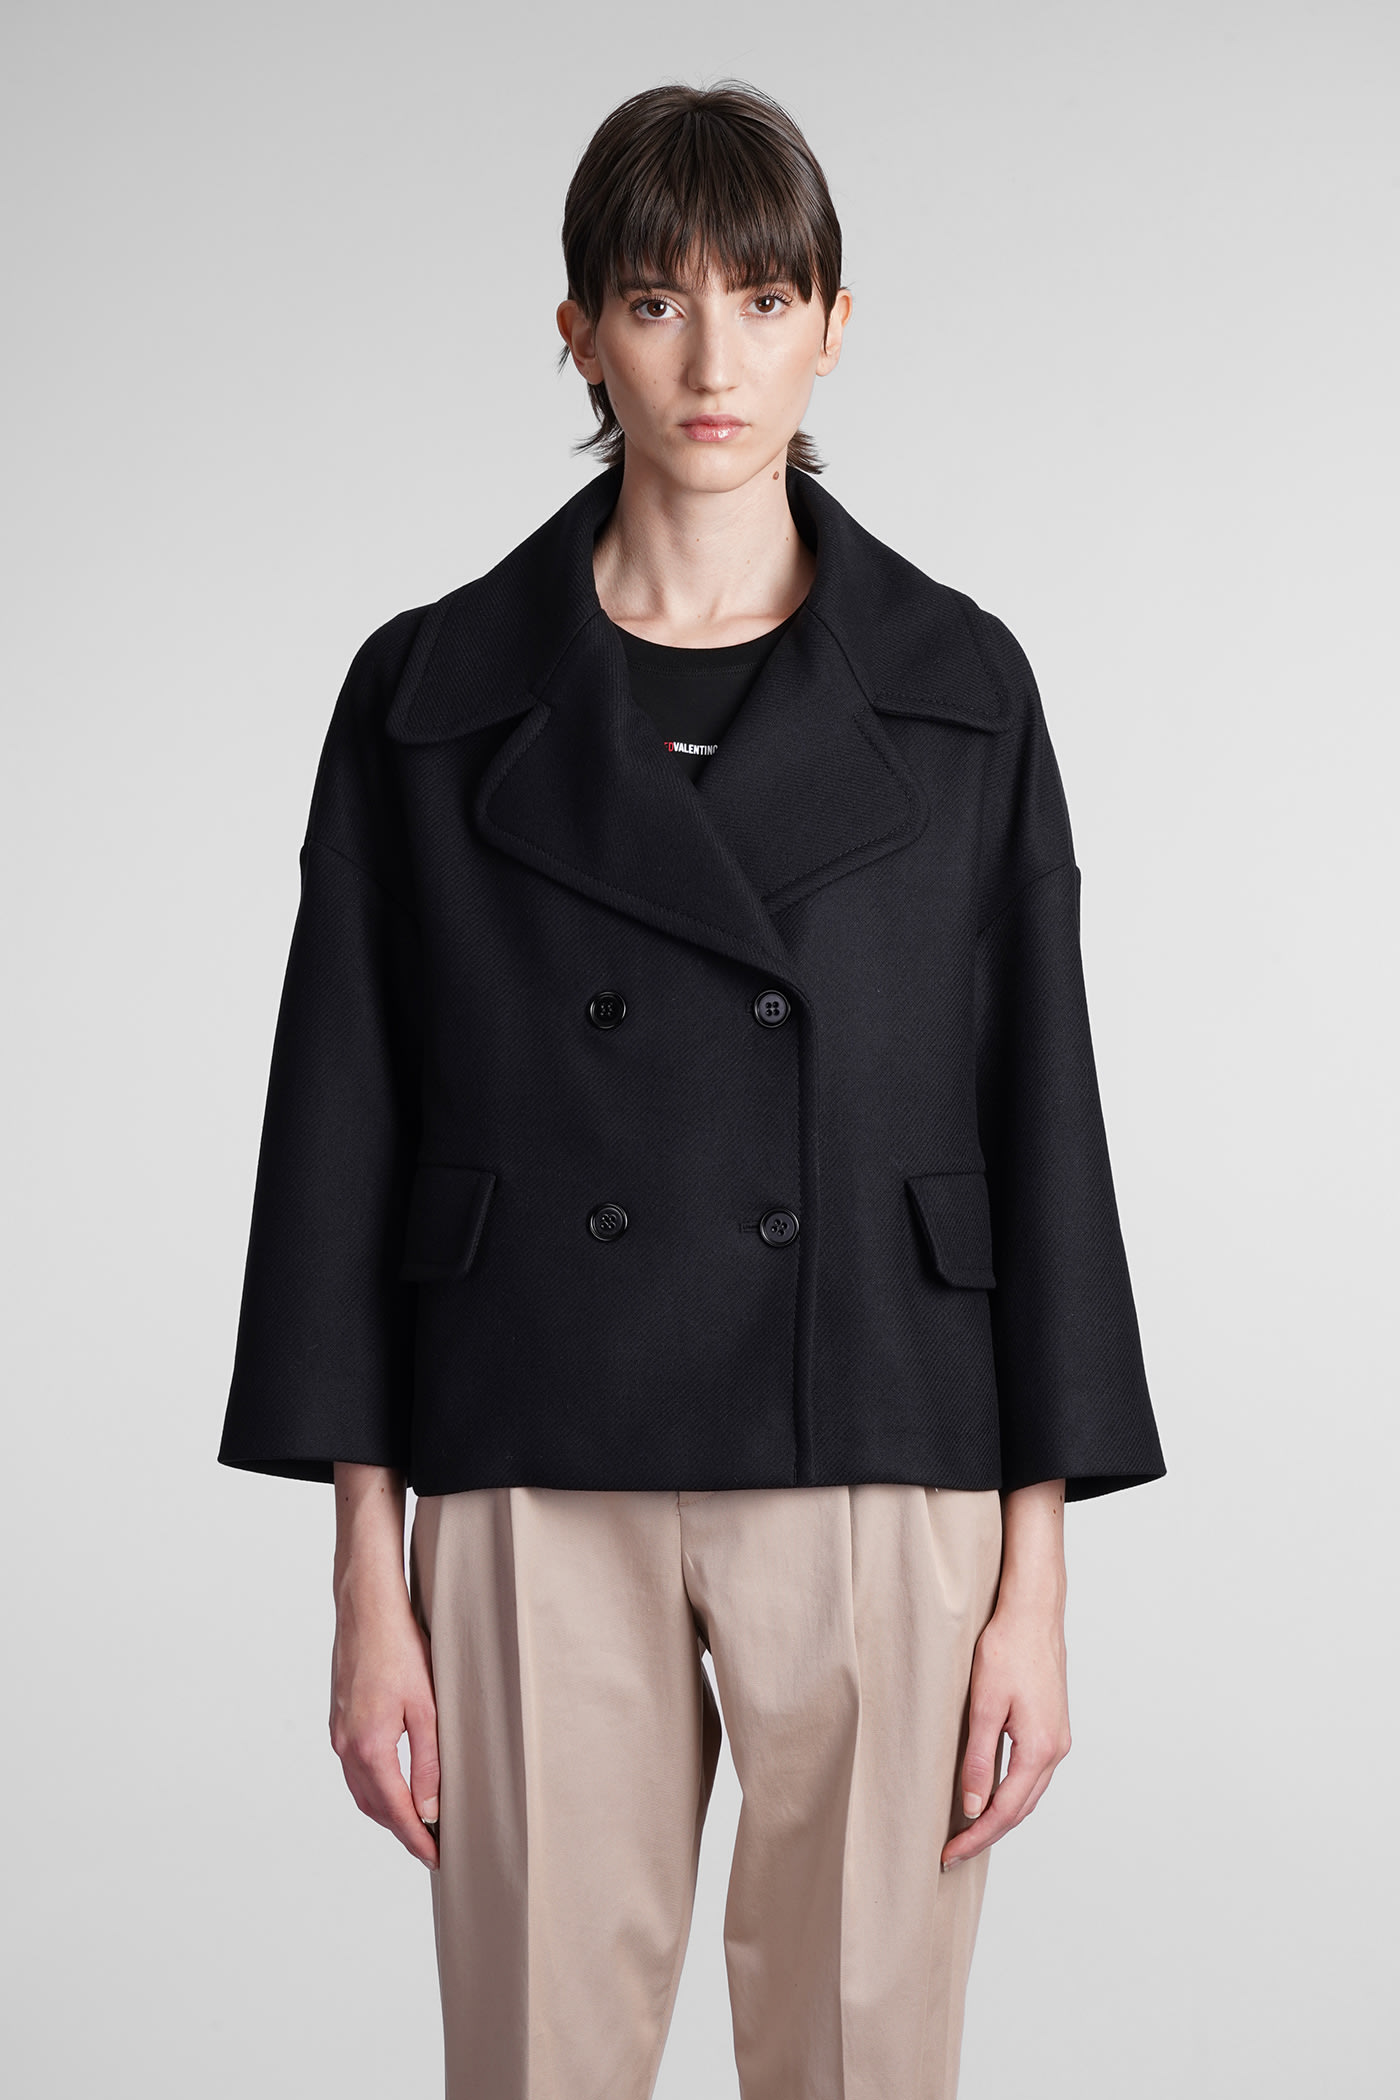 RED Valentino Coat In Black Wool